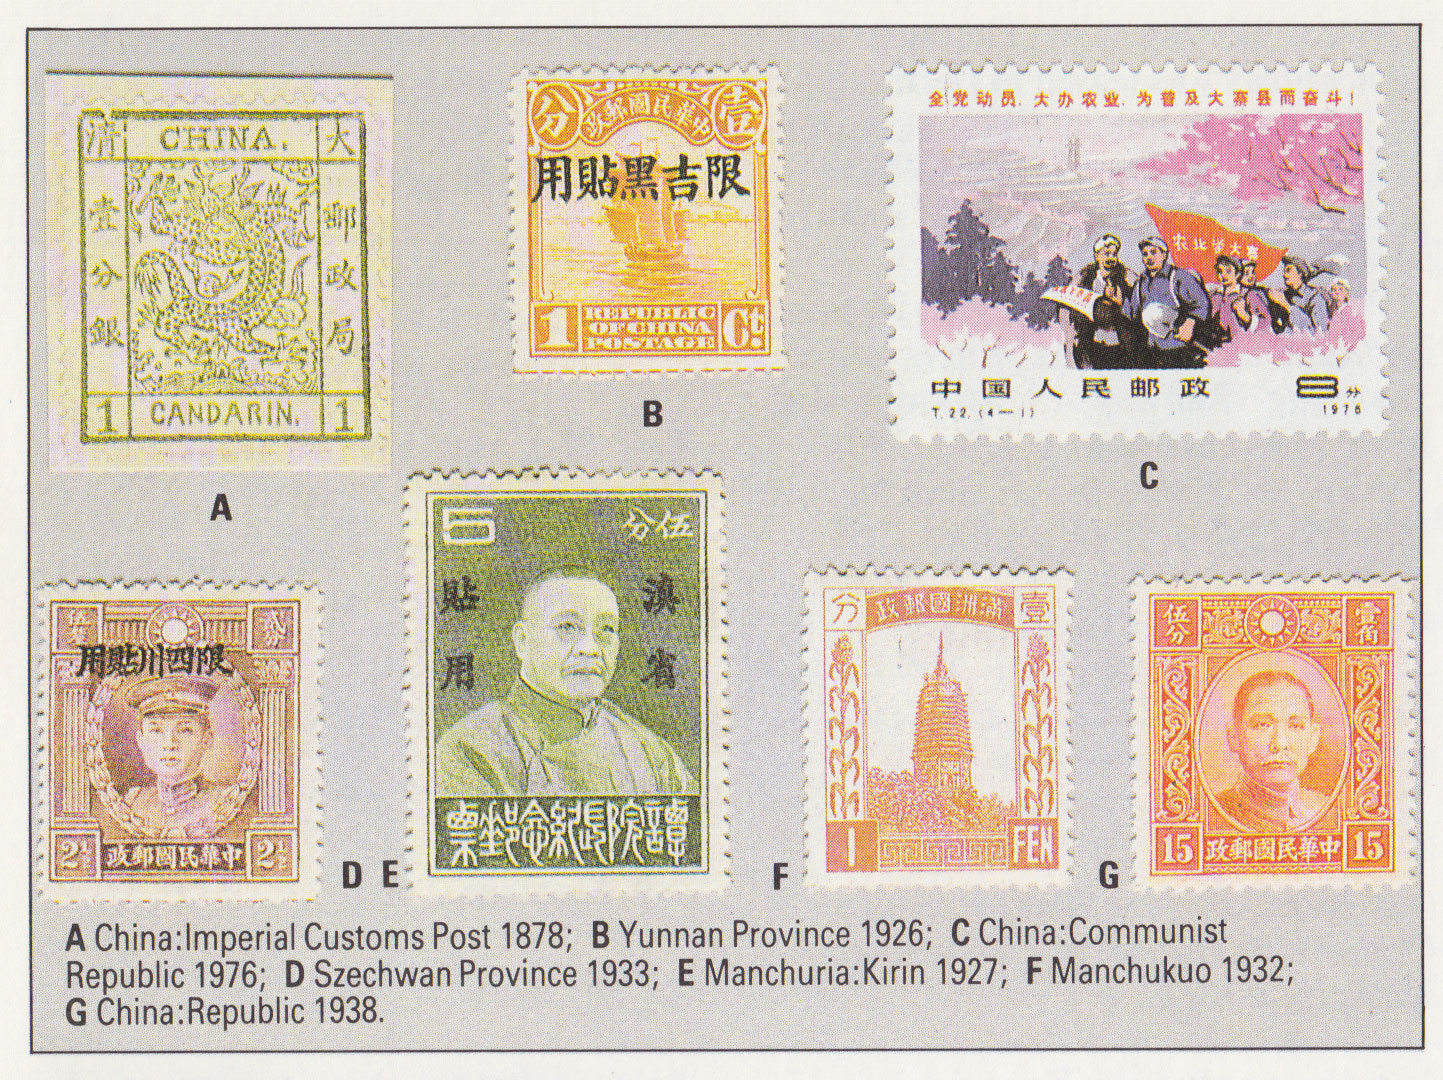 Rare Chinese stamps